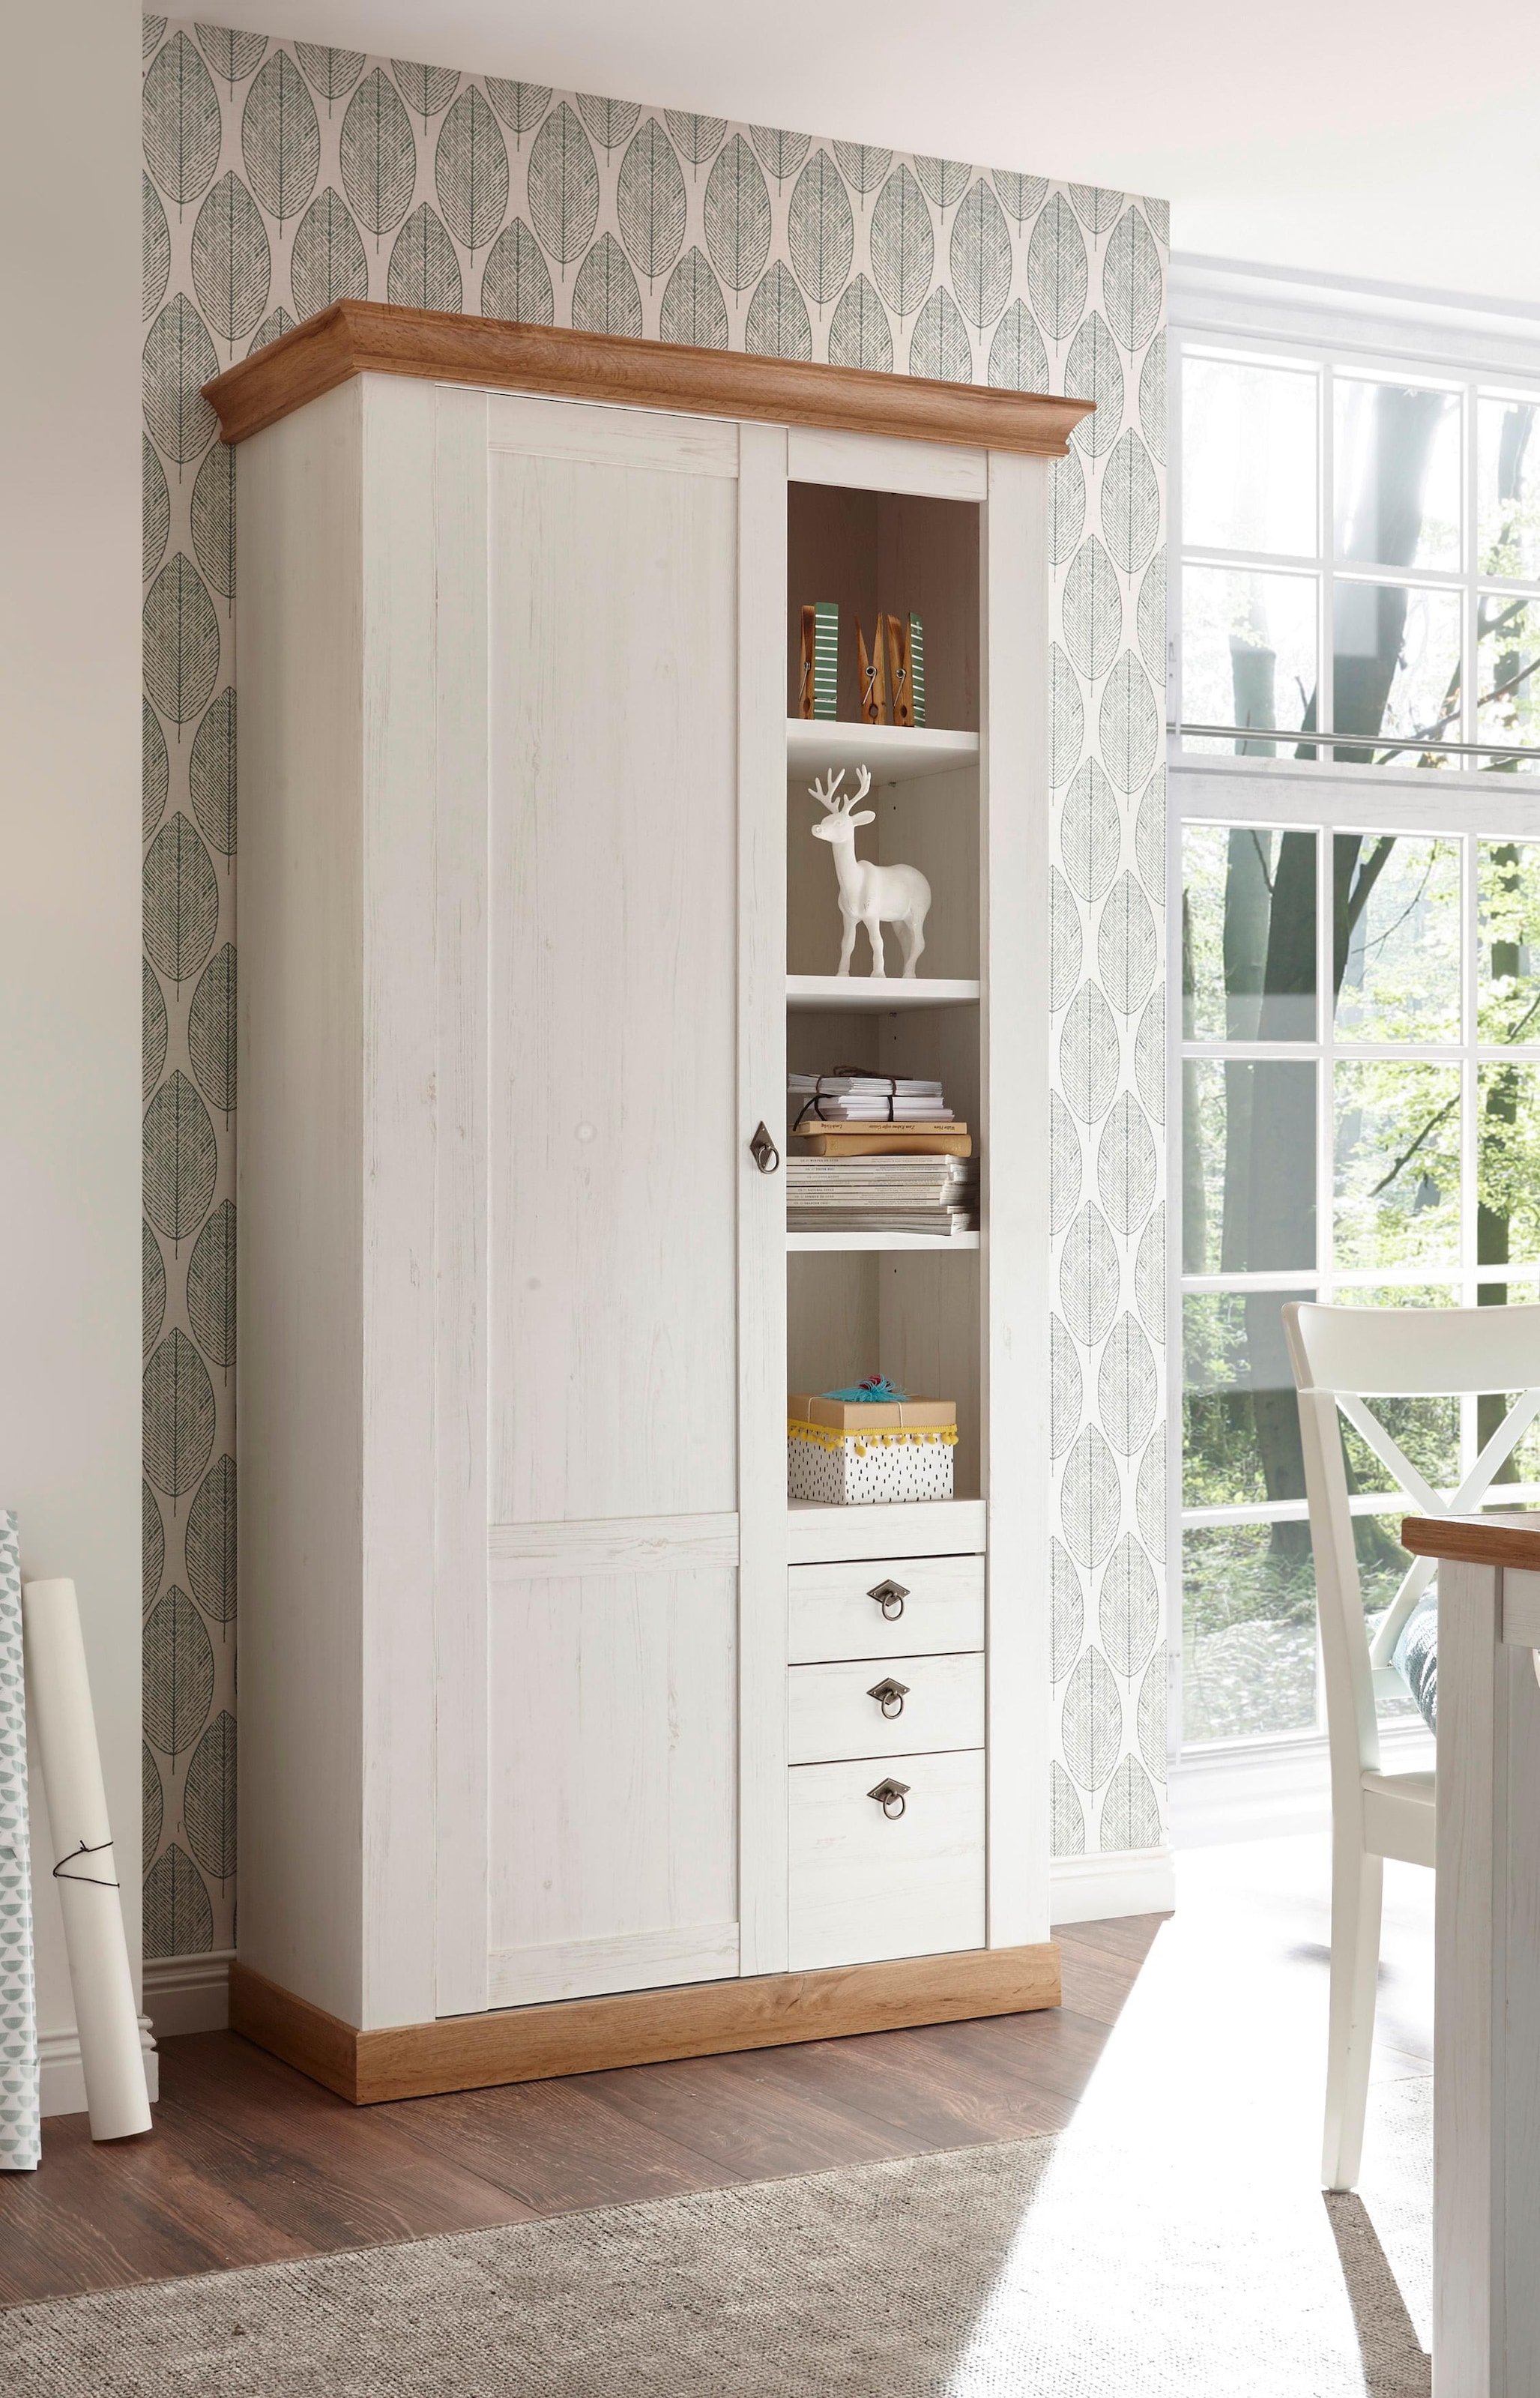 Home affaire Highboard "Cremona", Höhe 204 cm